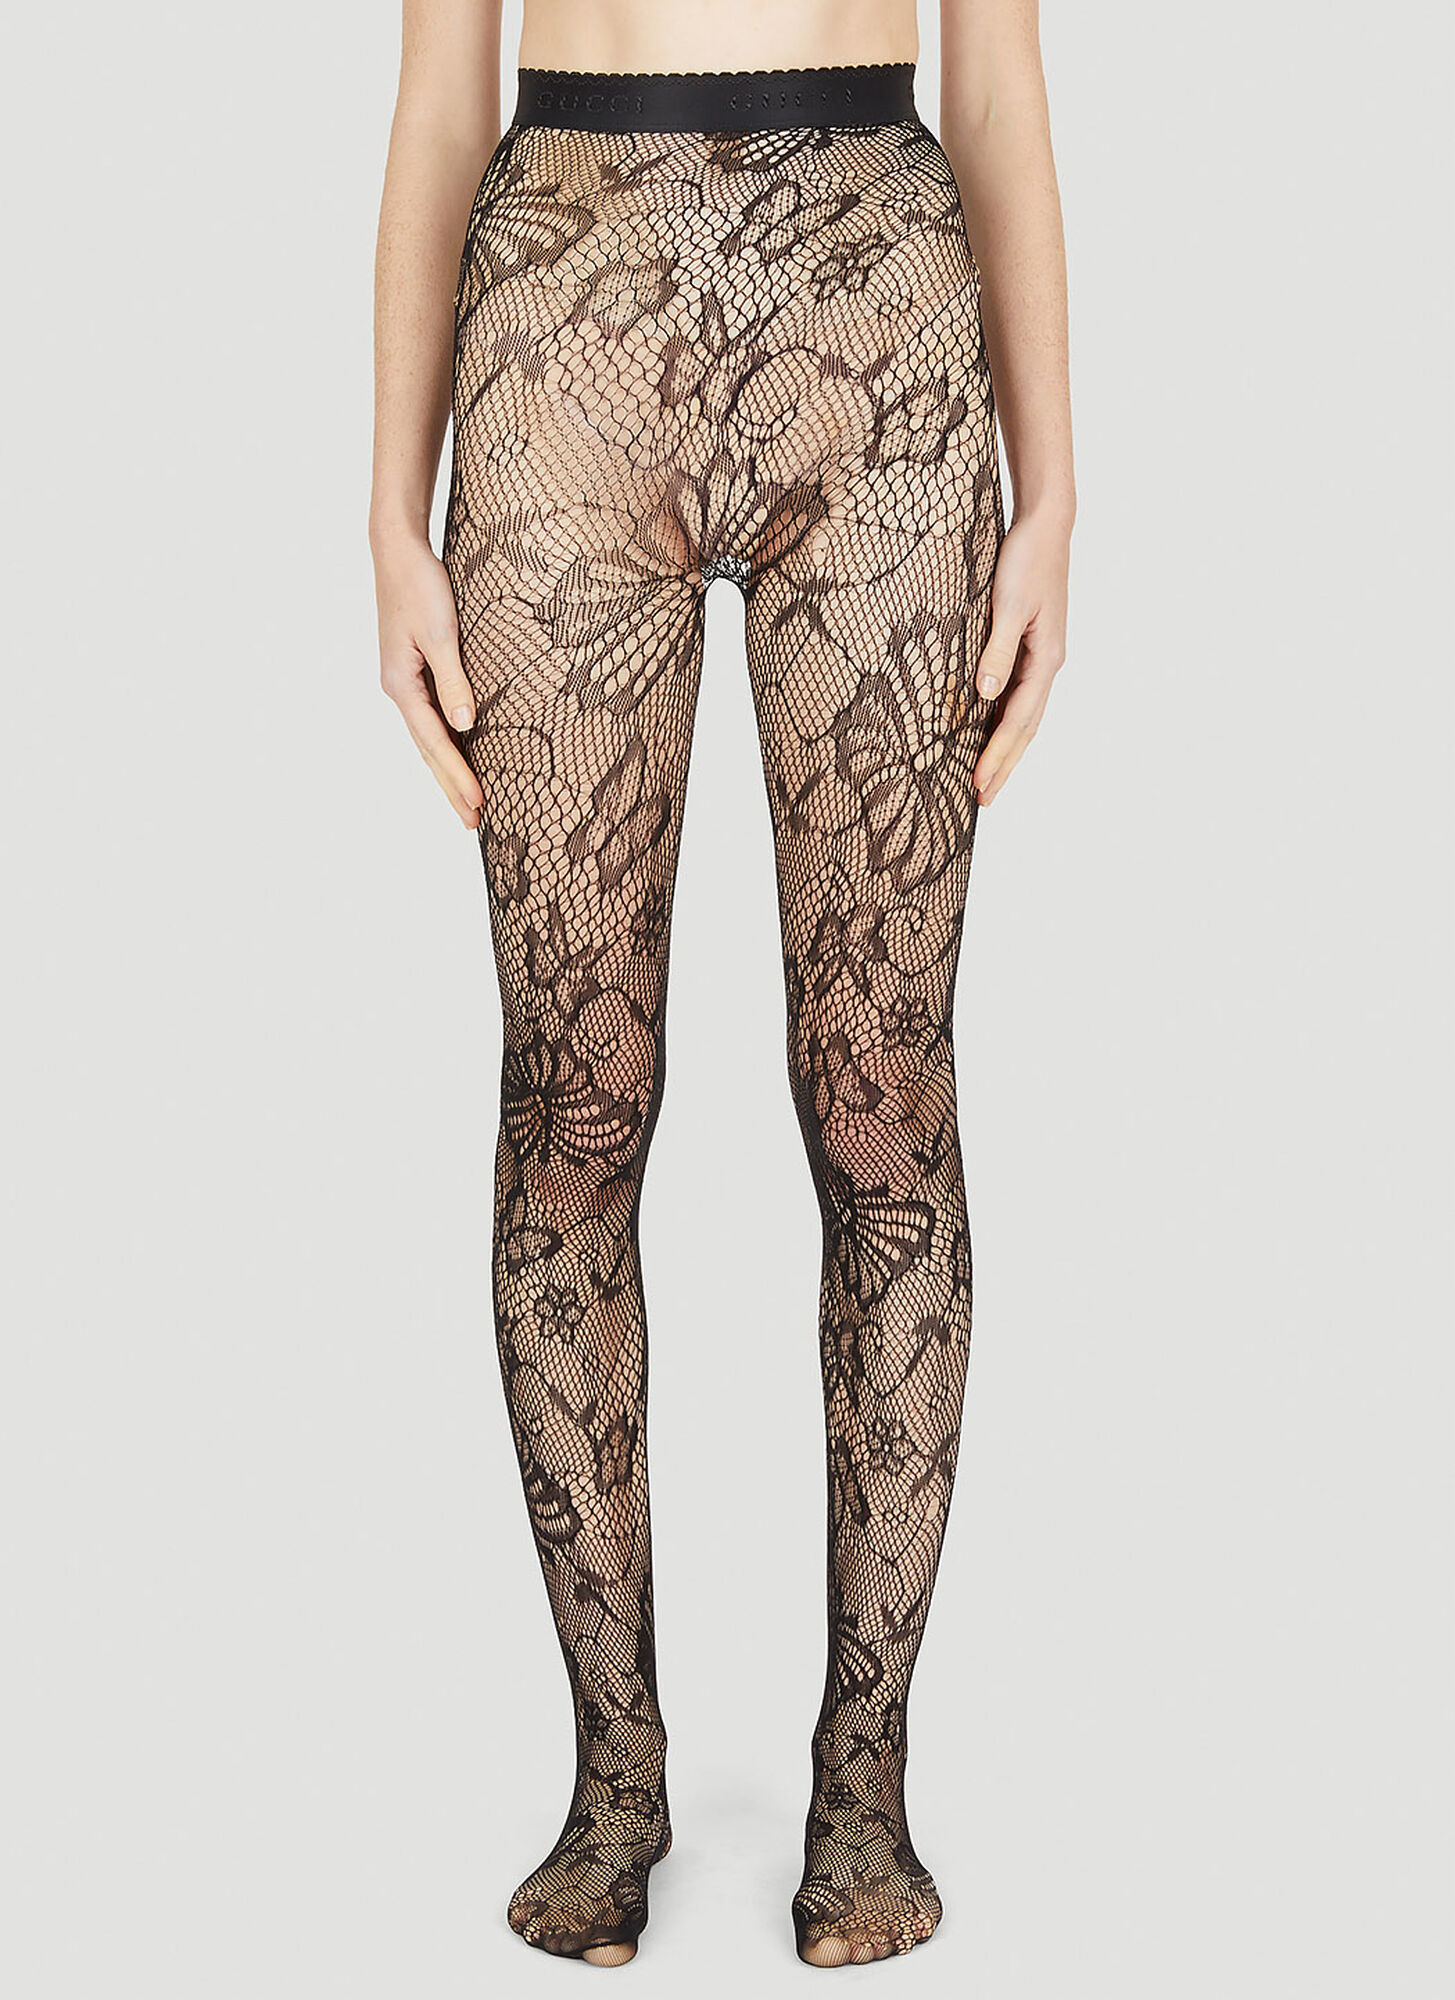 Gucci Intarsia Tights - Brown  Patterned tights, Gucci pattern, Fashion  figures